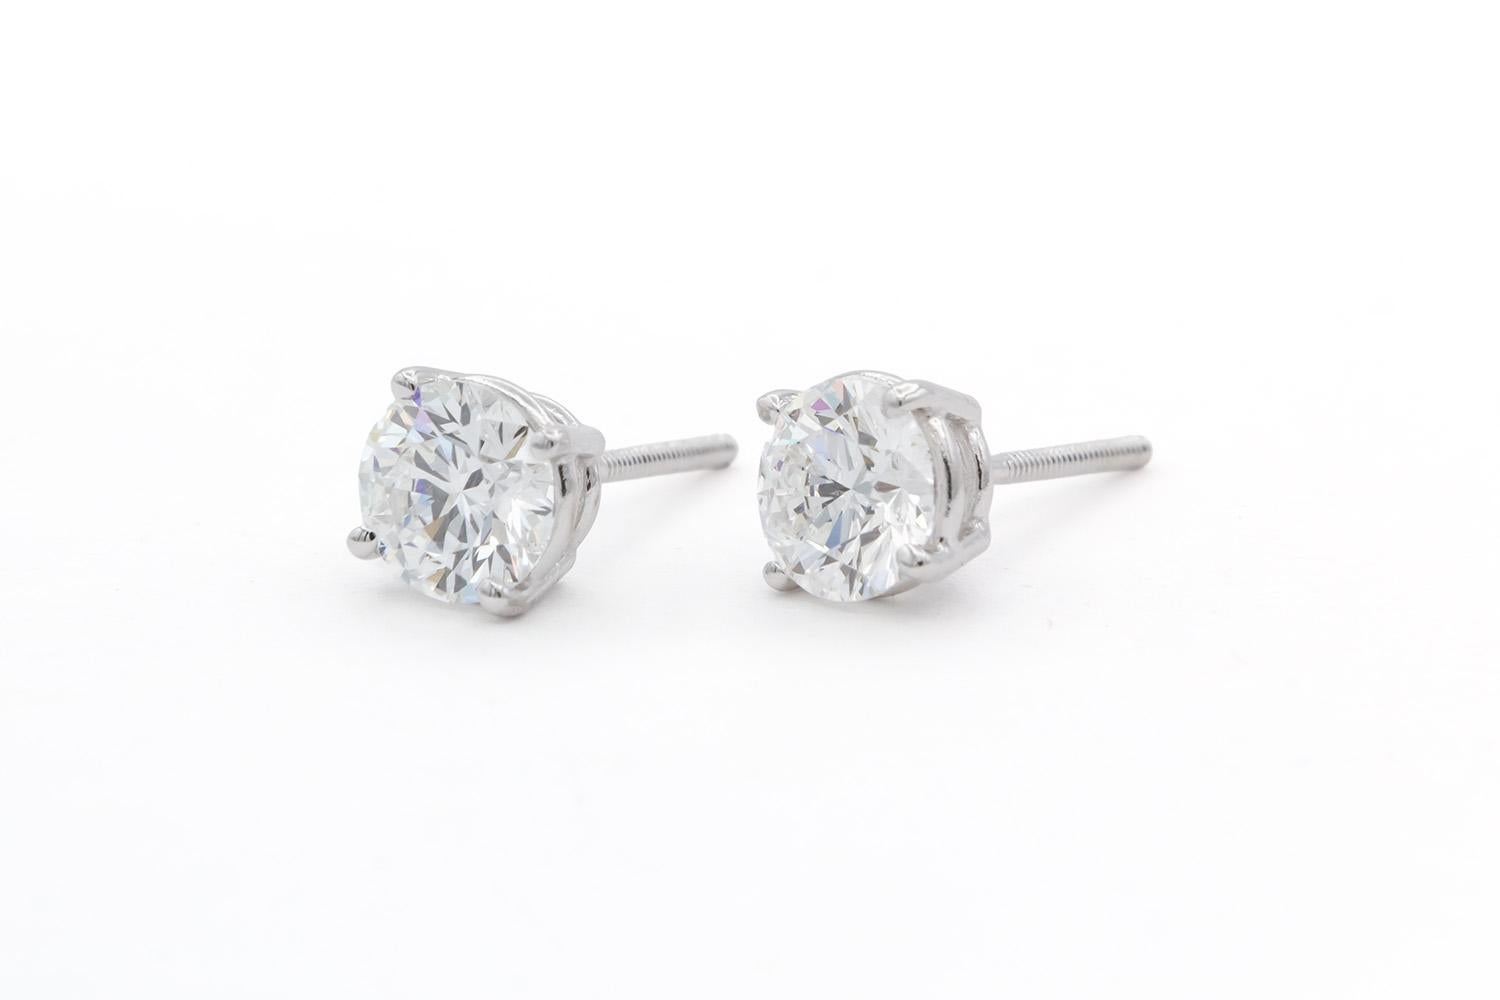 14K White Gold & Diamond Stud Earrings 1.80ctw Screw Backing In Excellent Condition For Sale In Tustin, CA